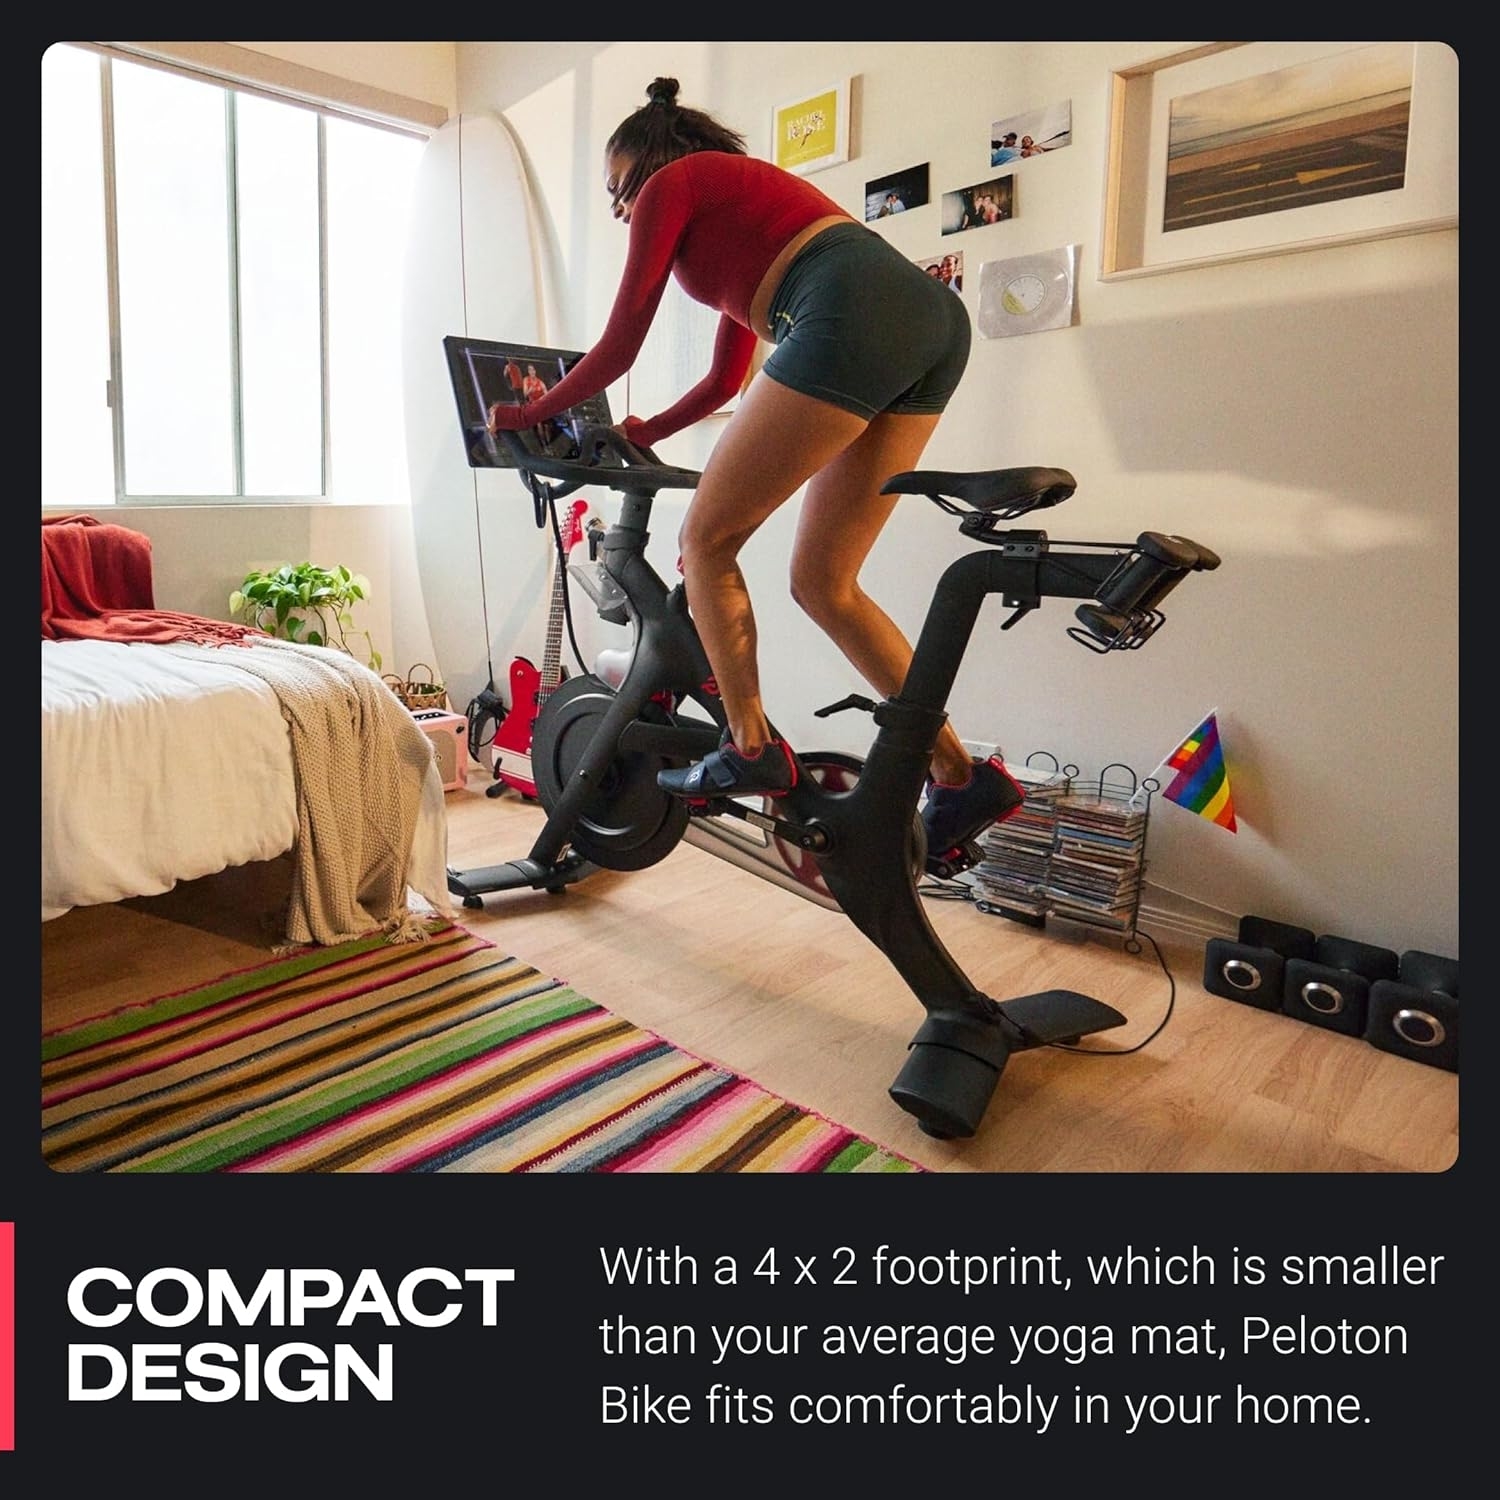 A model using the peloton, which has a 4 x 2 foot footprint (smaller than the average yoga mat)